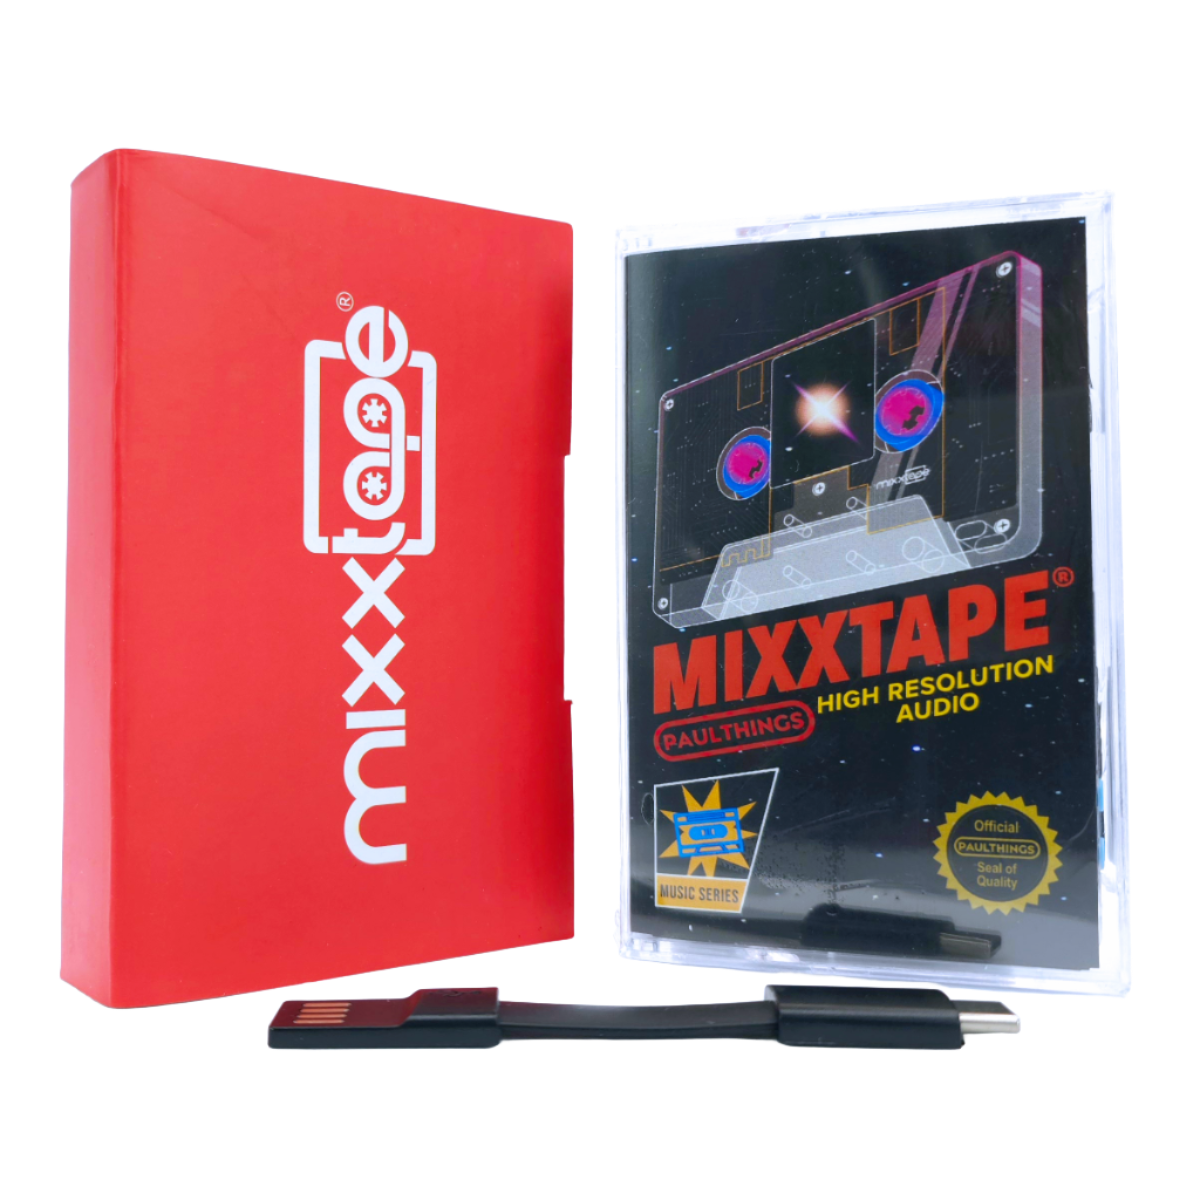 Mixxtape, a digital & analog cassette tape priced at $45. This unique creation combines nostalgia with modern technology.